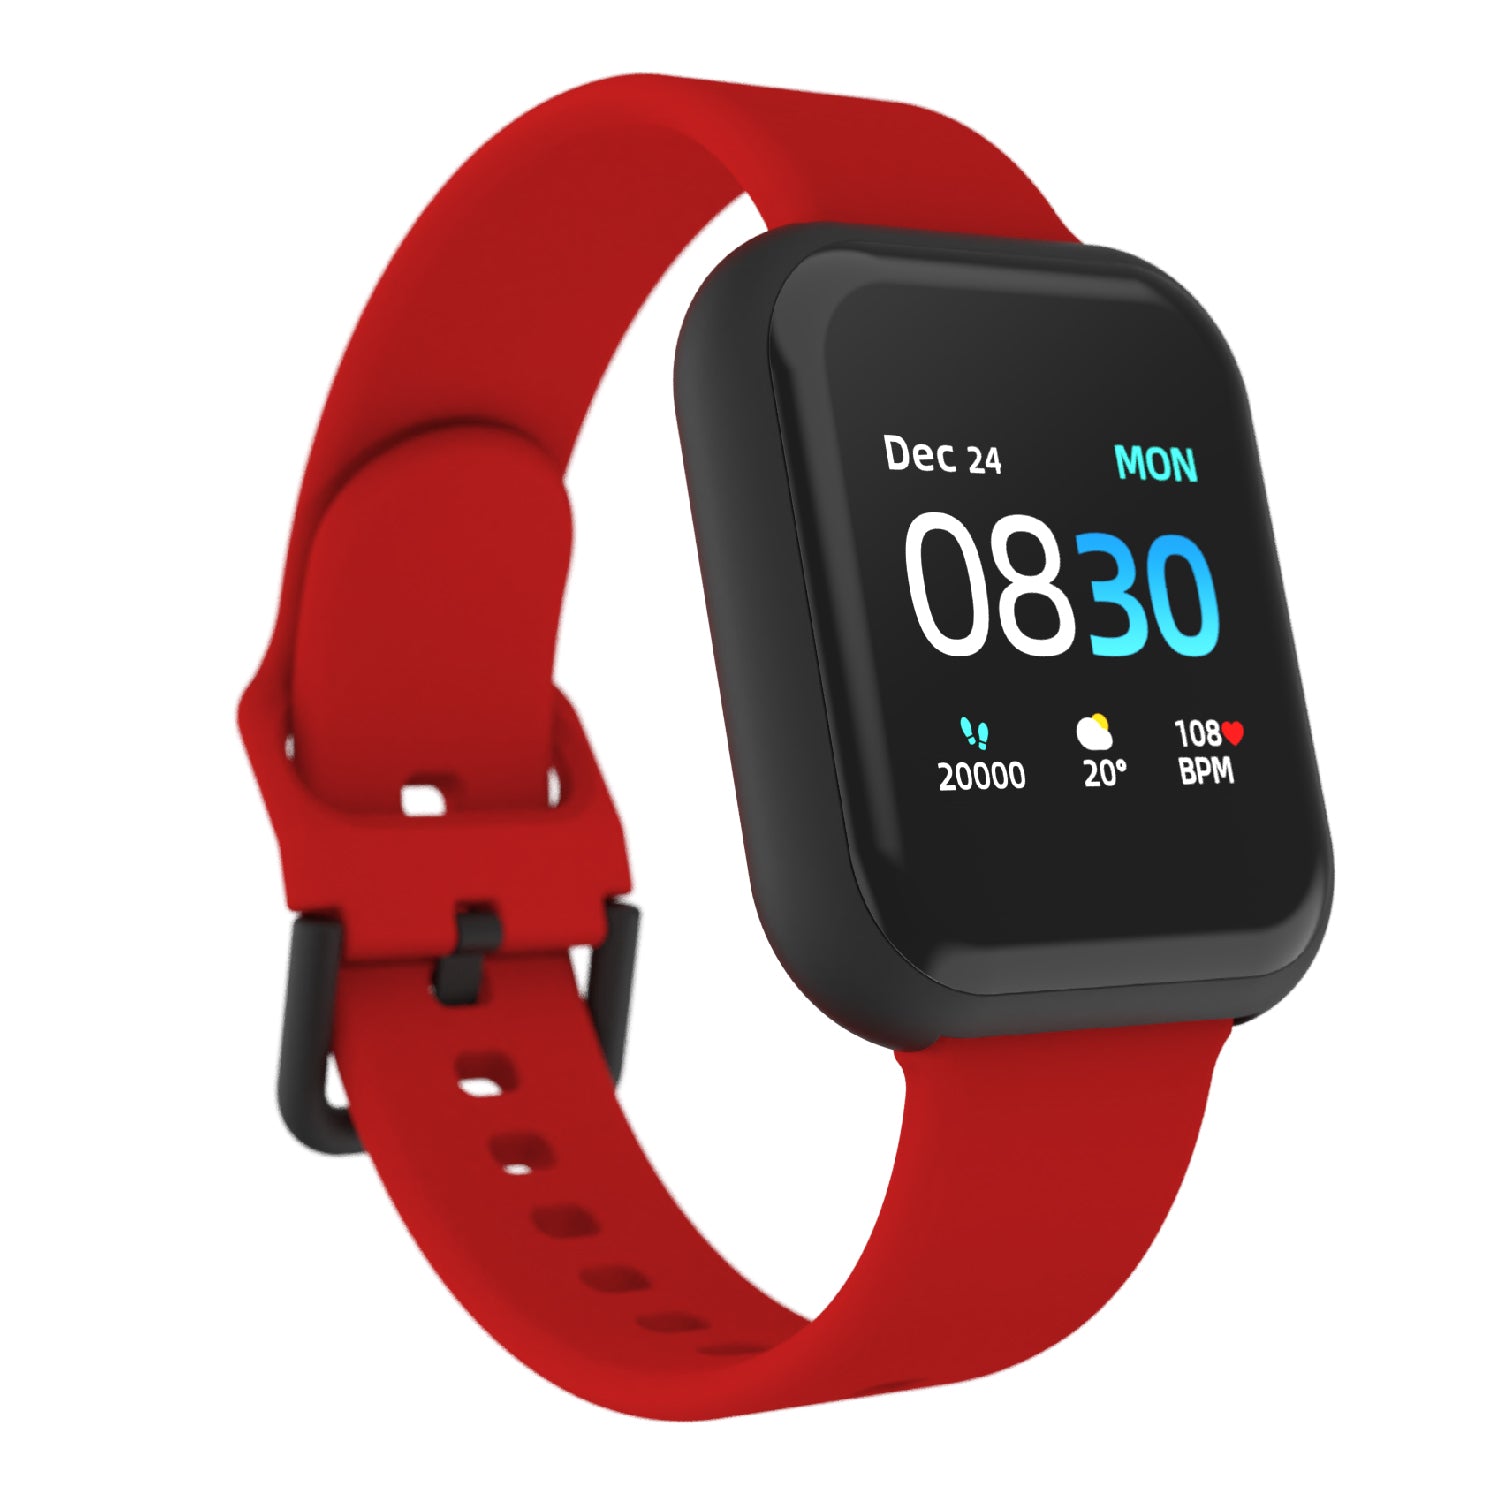 iTouch Air 3 Smartwatch in Black with Red Strap